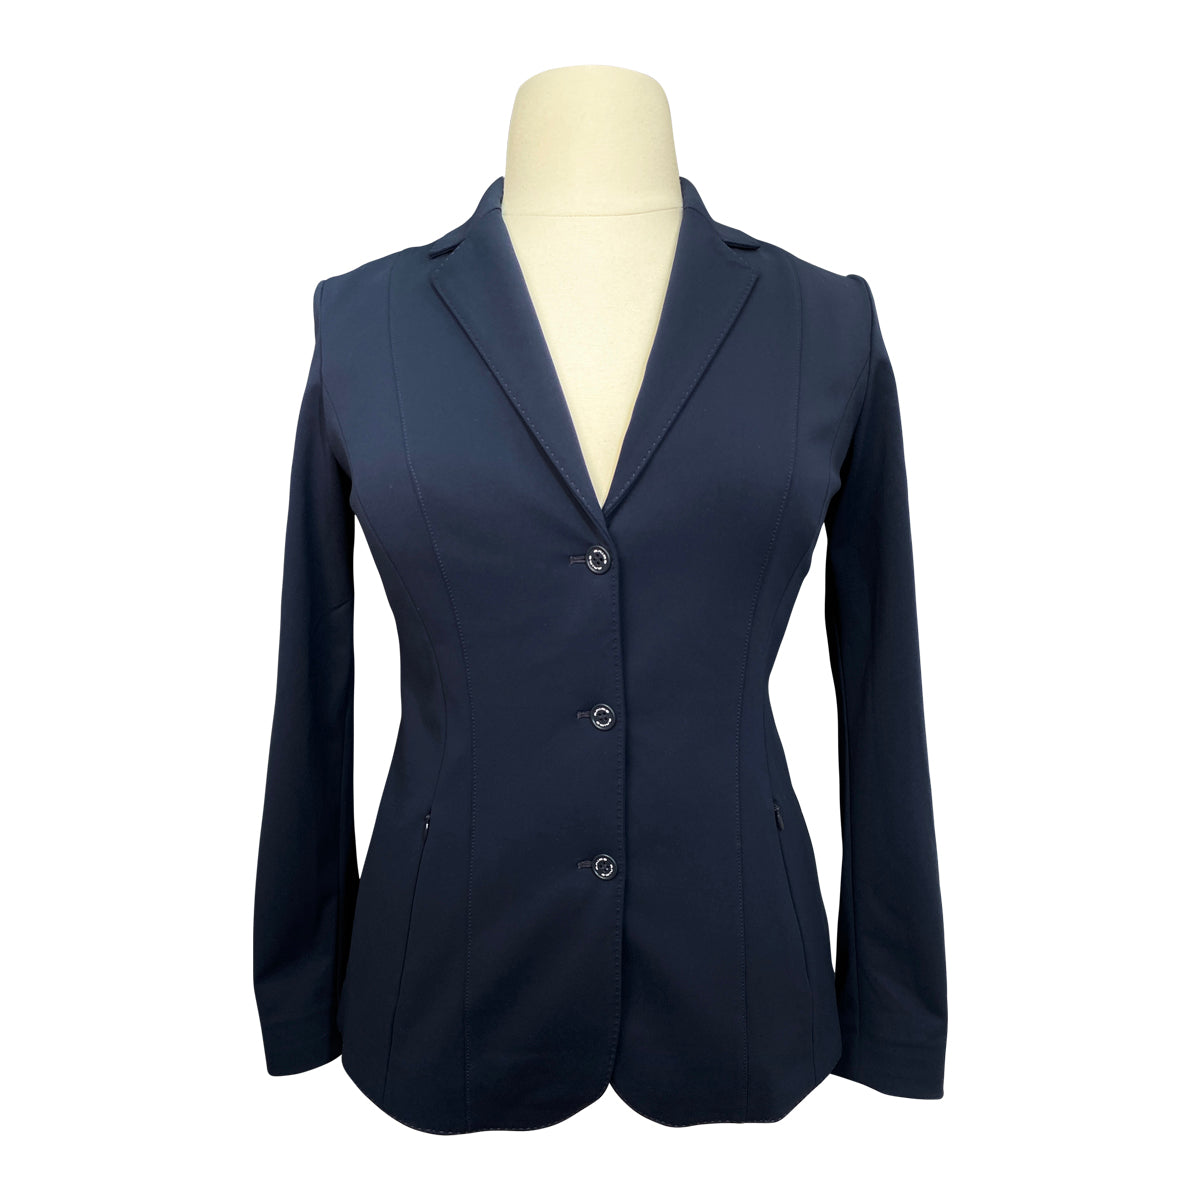 Animo 'Lud' Show Jacket  in Navy